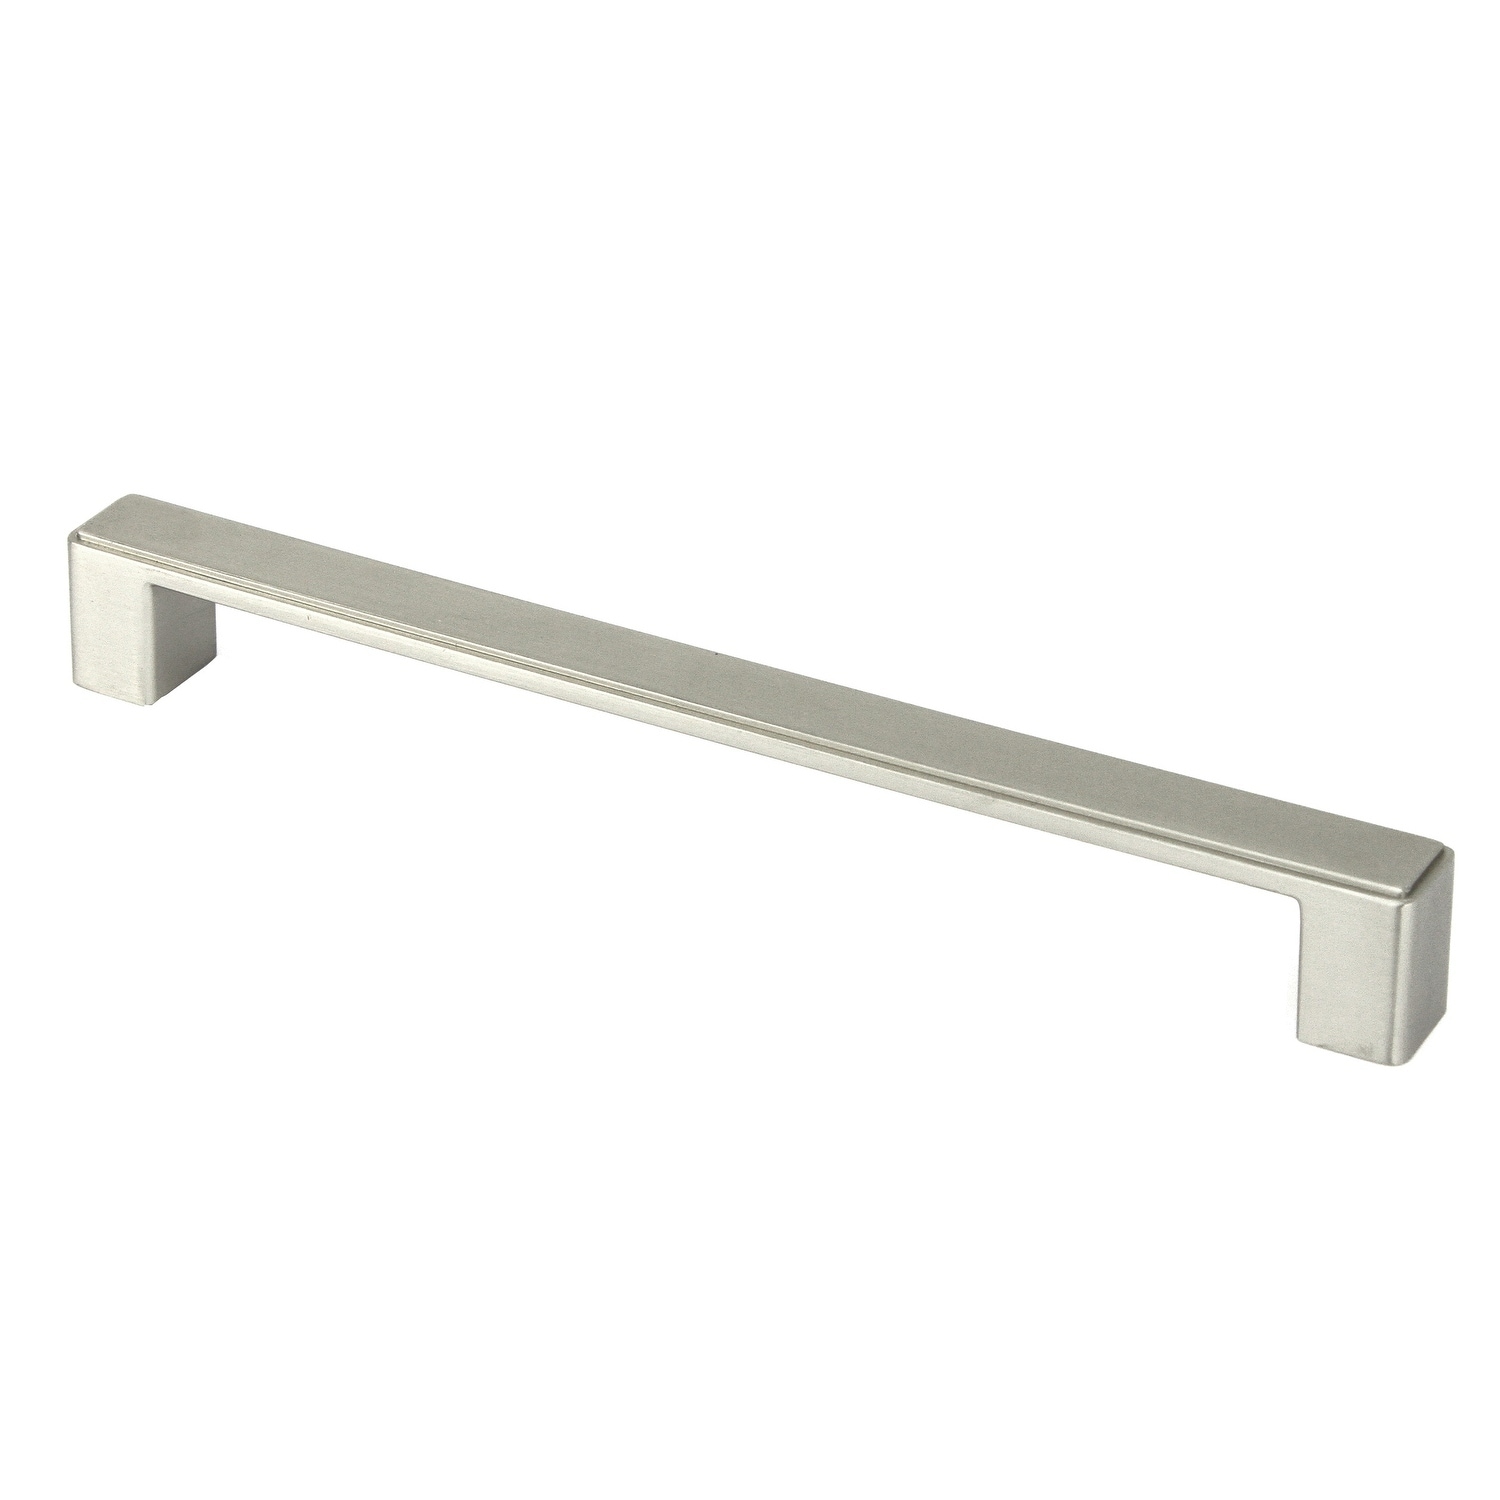 NICKLE Metal Pull Brushed Oil-Rubbed Nickle Finish Drawer Bar Pull Handles